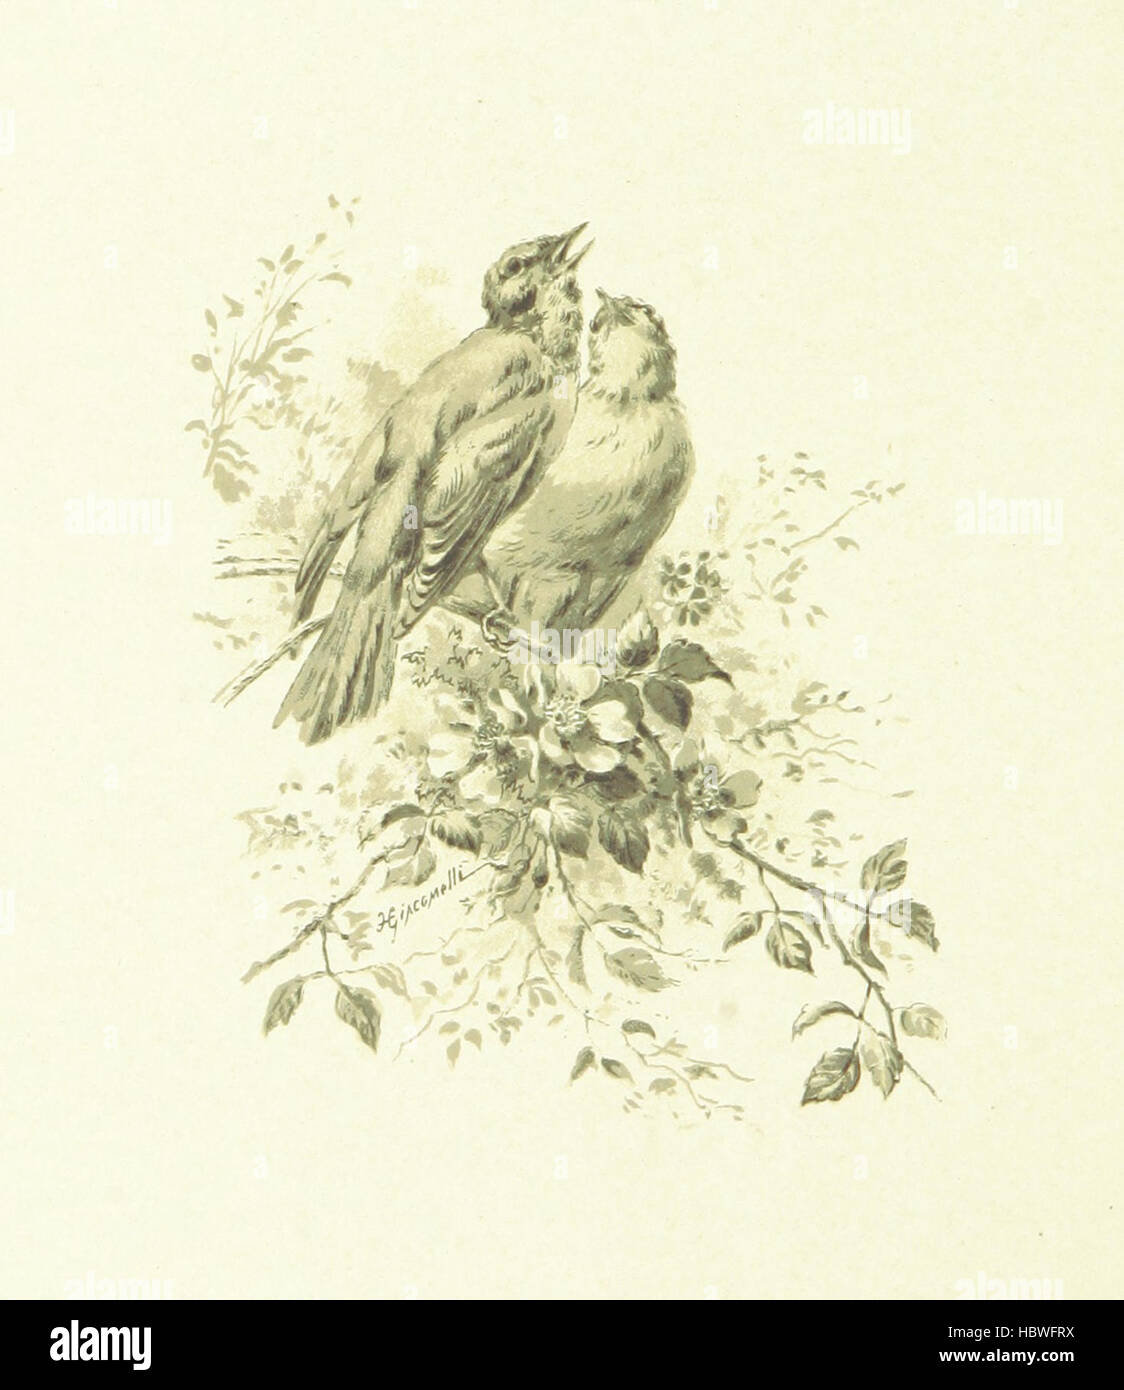 Image taken from page 4 of 'Spring (Summer-Autumn-Winter) songs and sketches' Image taken from page 4 of 'Spring (Summer-Autumn-Winter) songs and Stock Photo